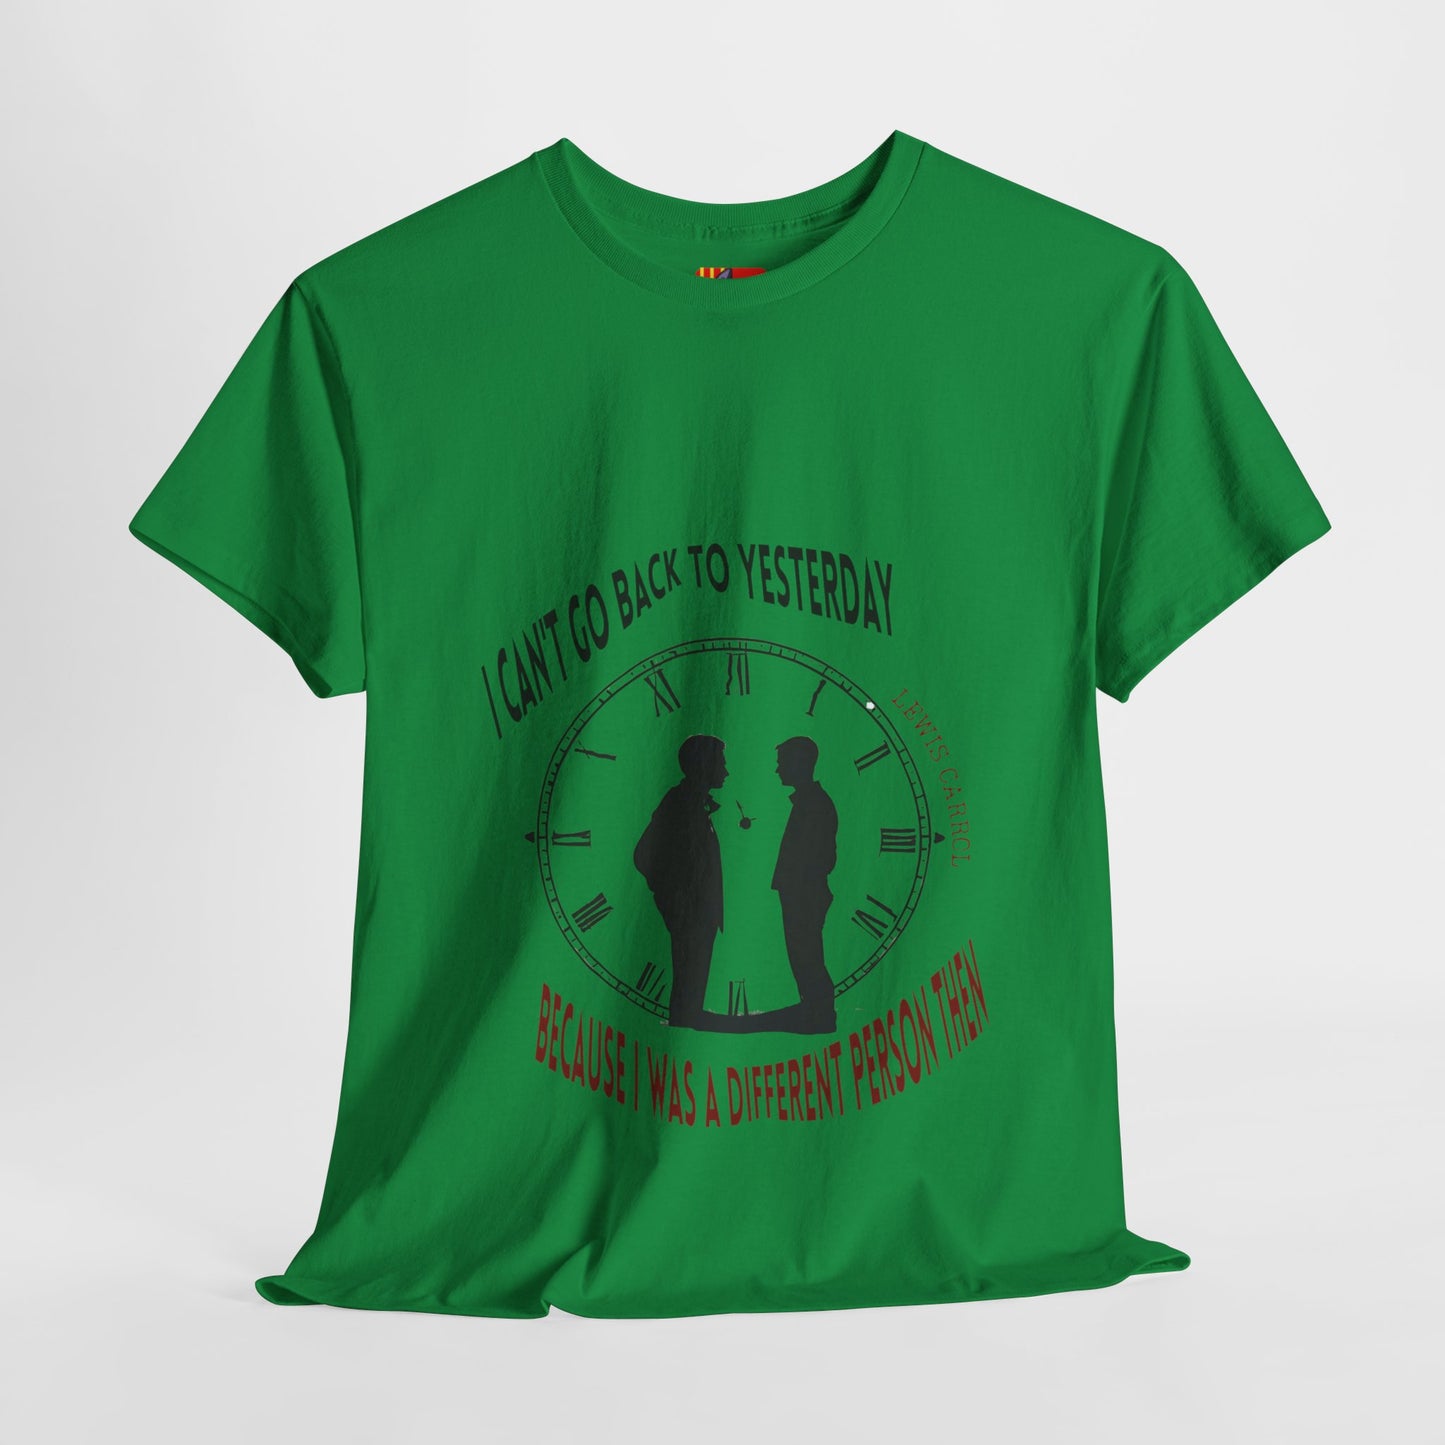 The Evolving Soul T-Shirt: Growth is Constant"Yesterday - a different person" Lewis Carrol